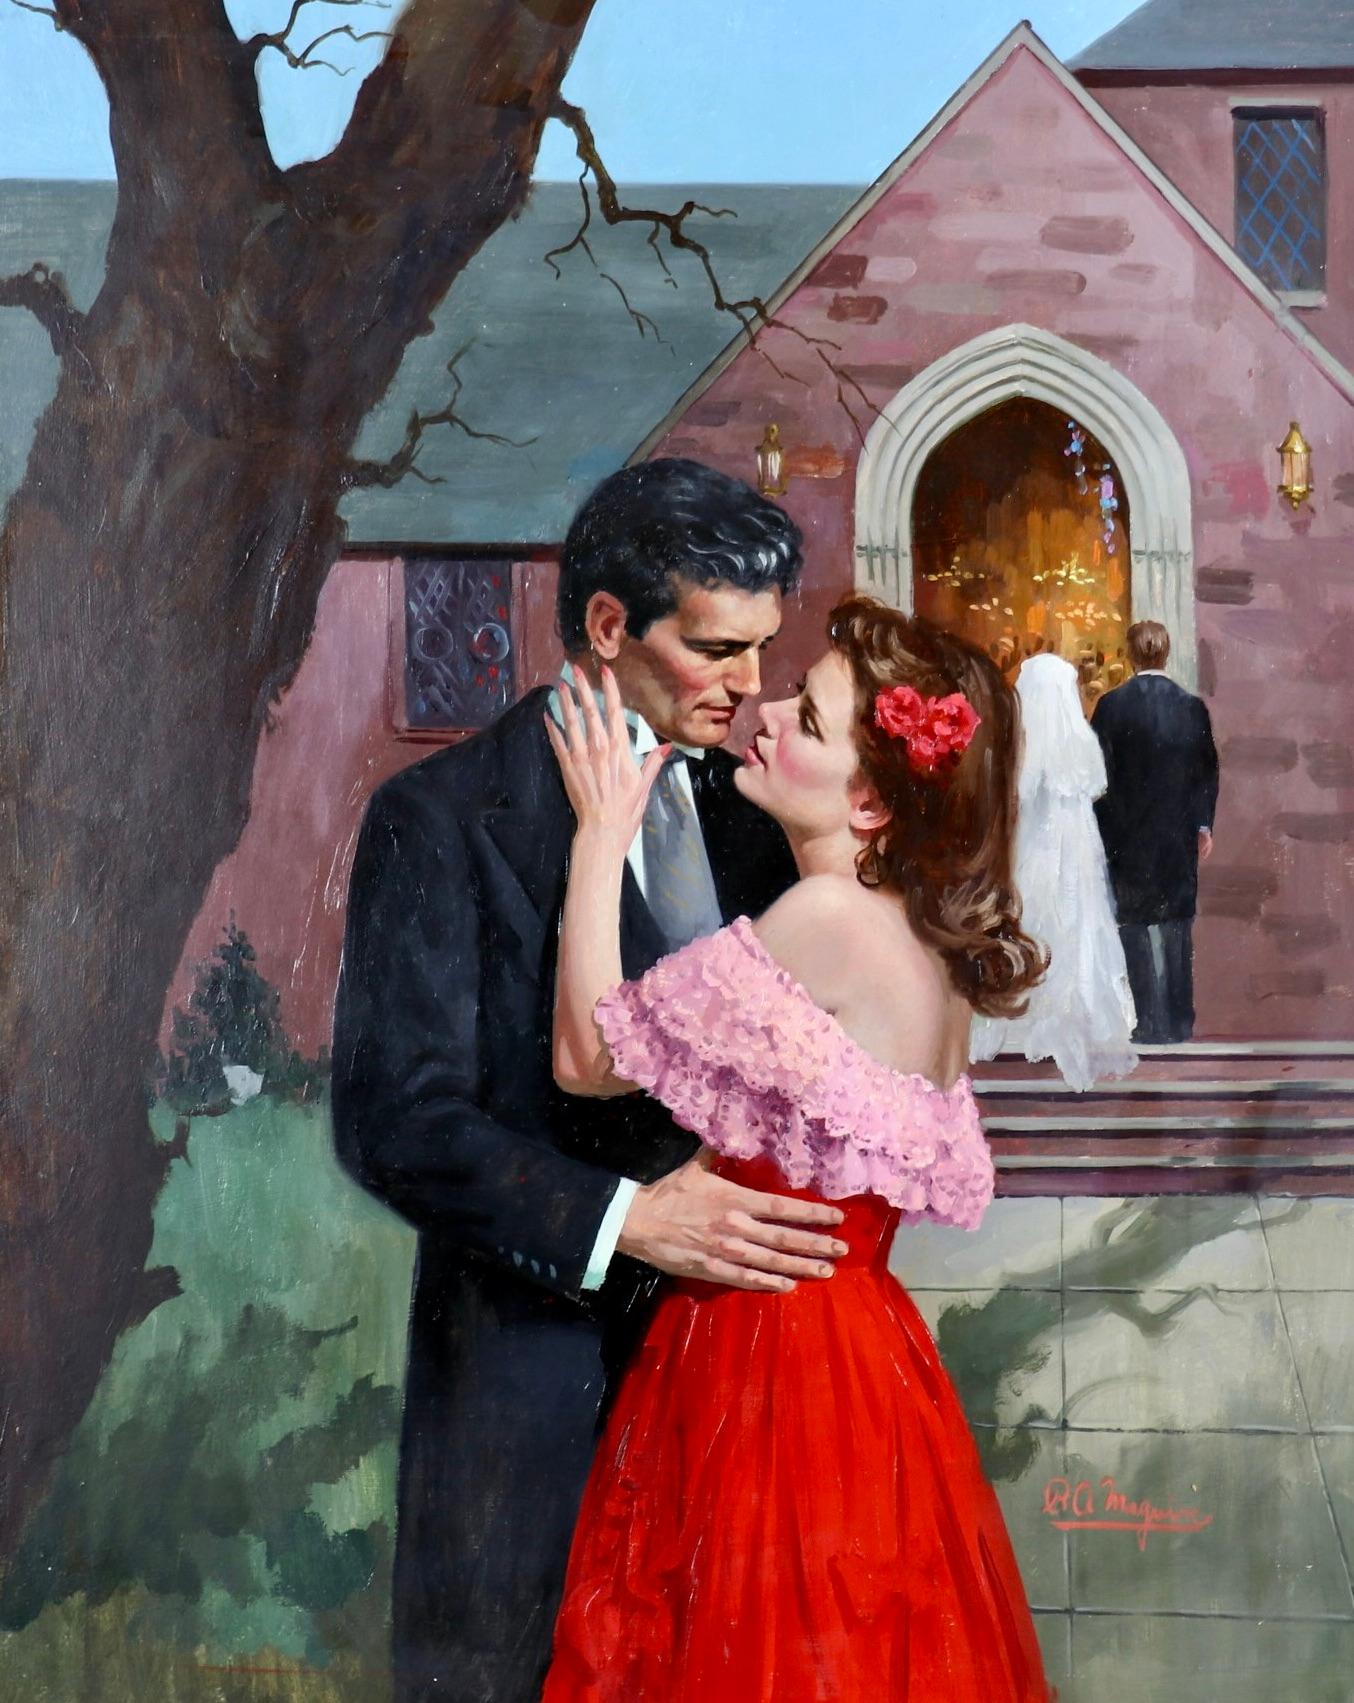 Wedding Scene - Painting by Robert Maguire